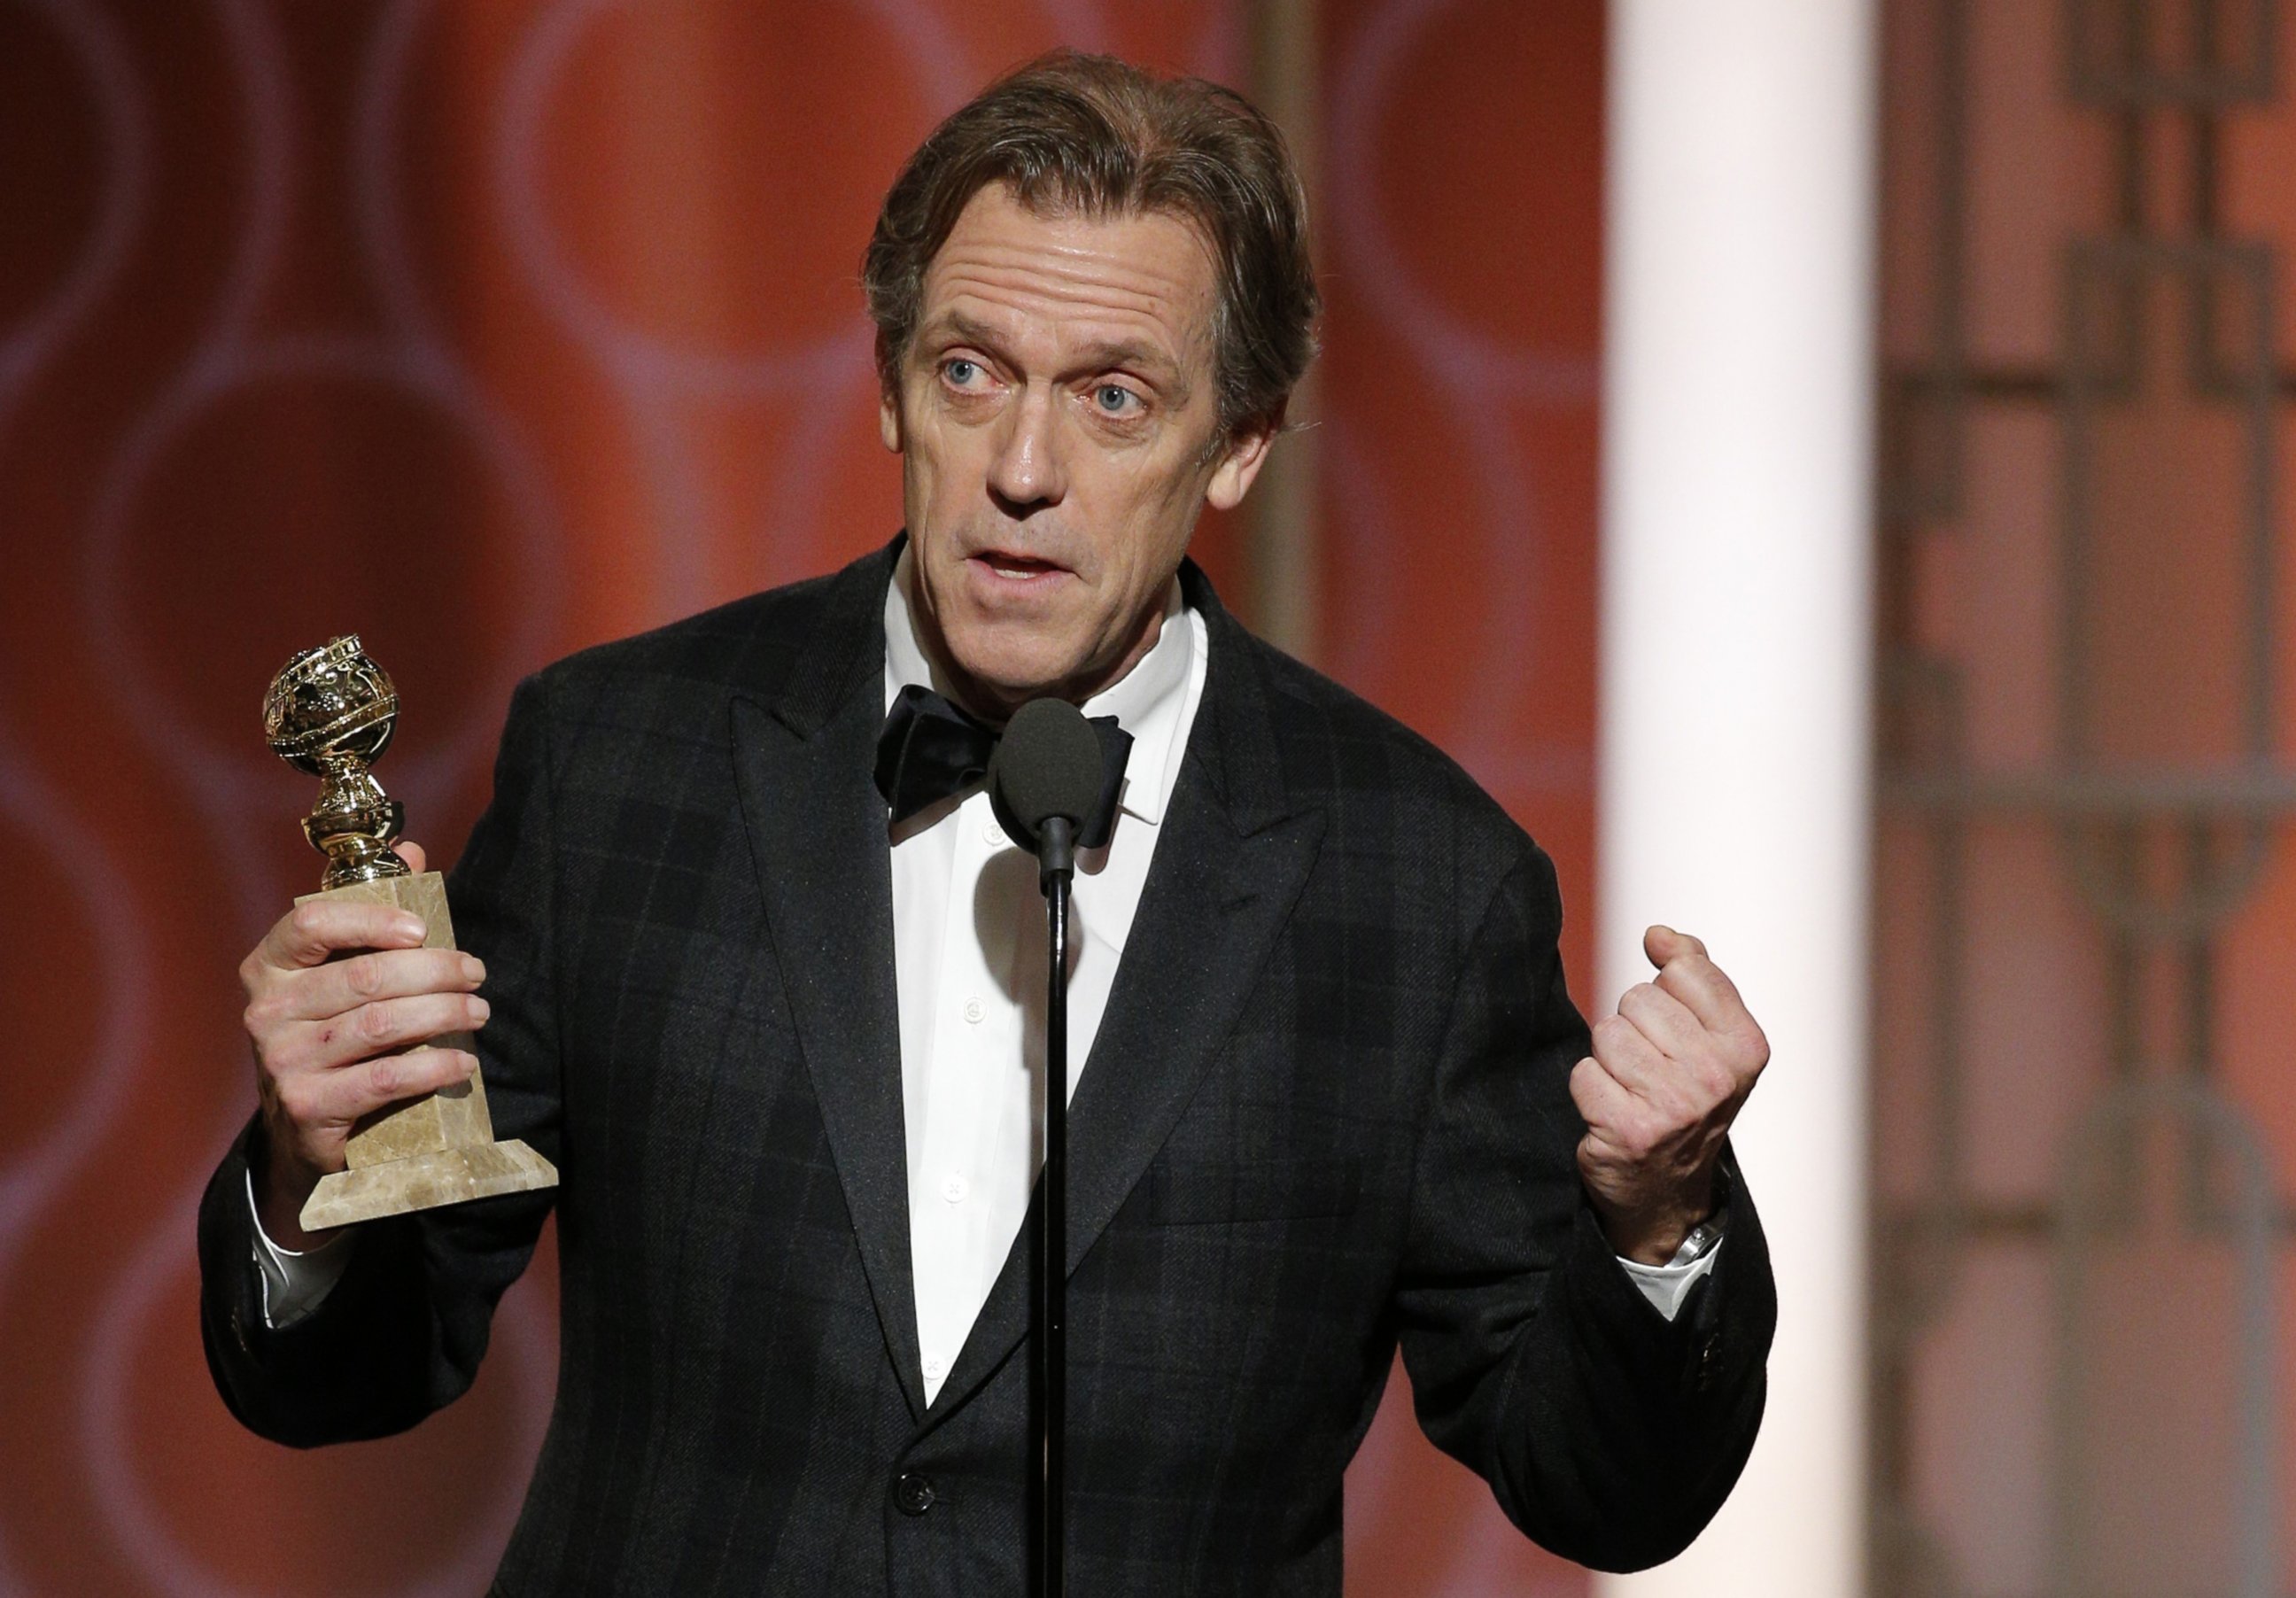 PHOTO: Hugh Laurie accepts the award for Best Supporting Actor in a Series/Limited Series/TV Movie for his role in "The Night Manager" during the 74th Annual Golden Globe Awards at The Beverly Hilton Hotel, on Jan. 8, 2017, in Beverly Hills, California.